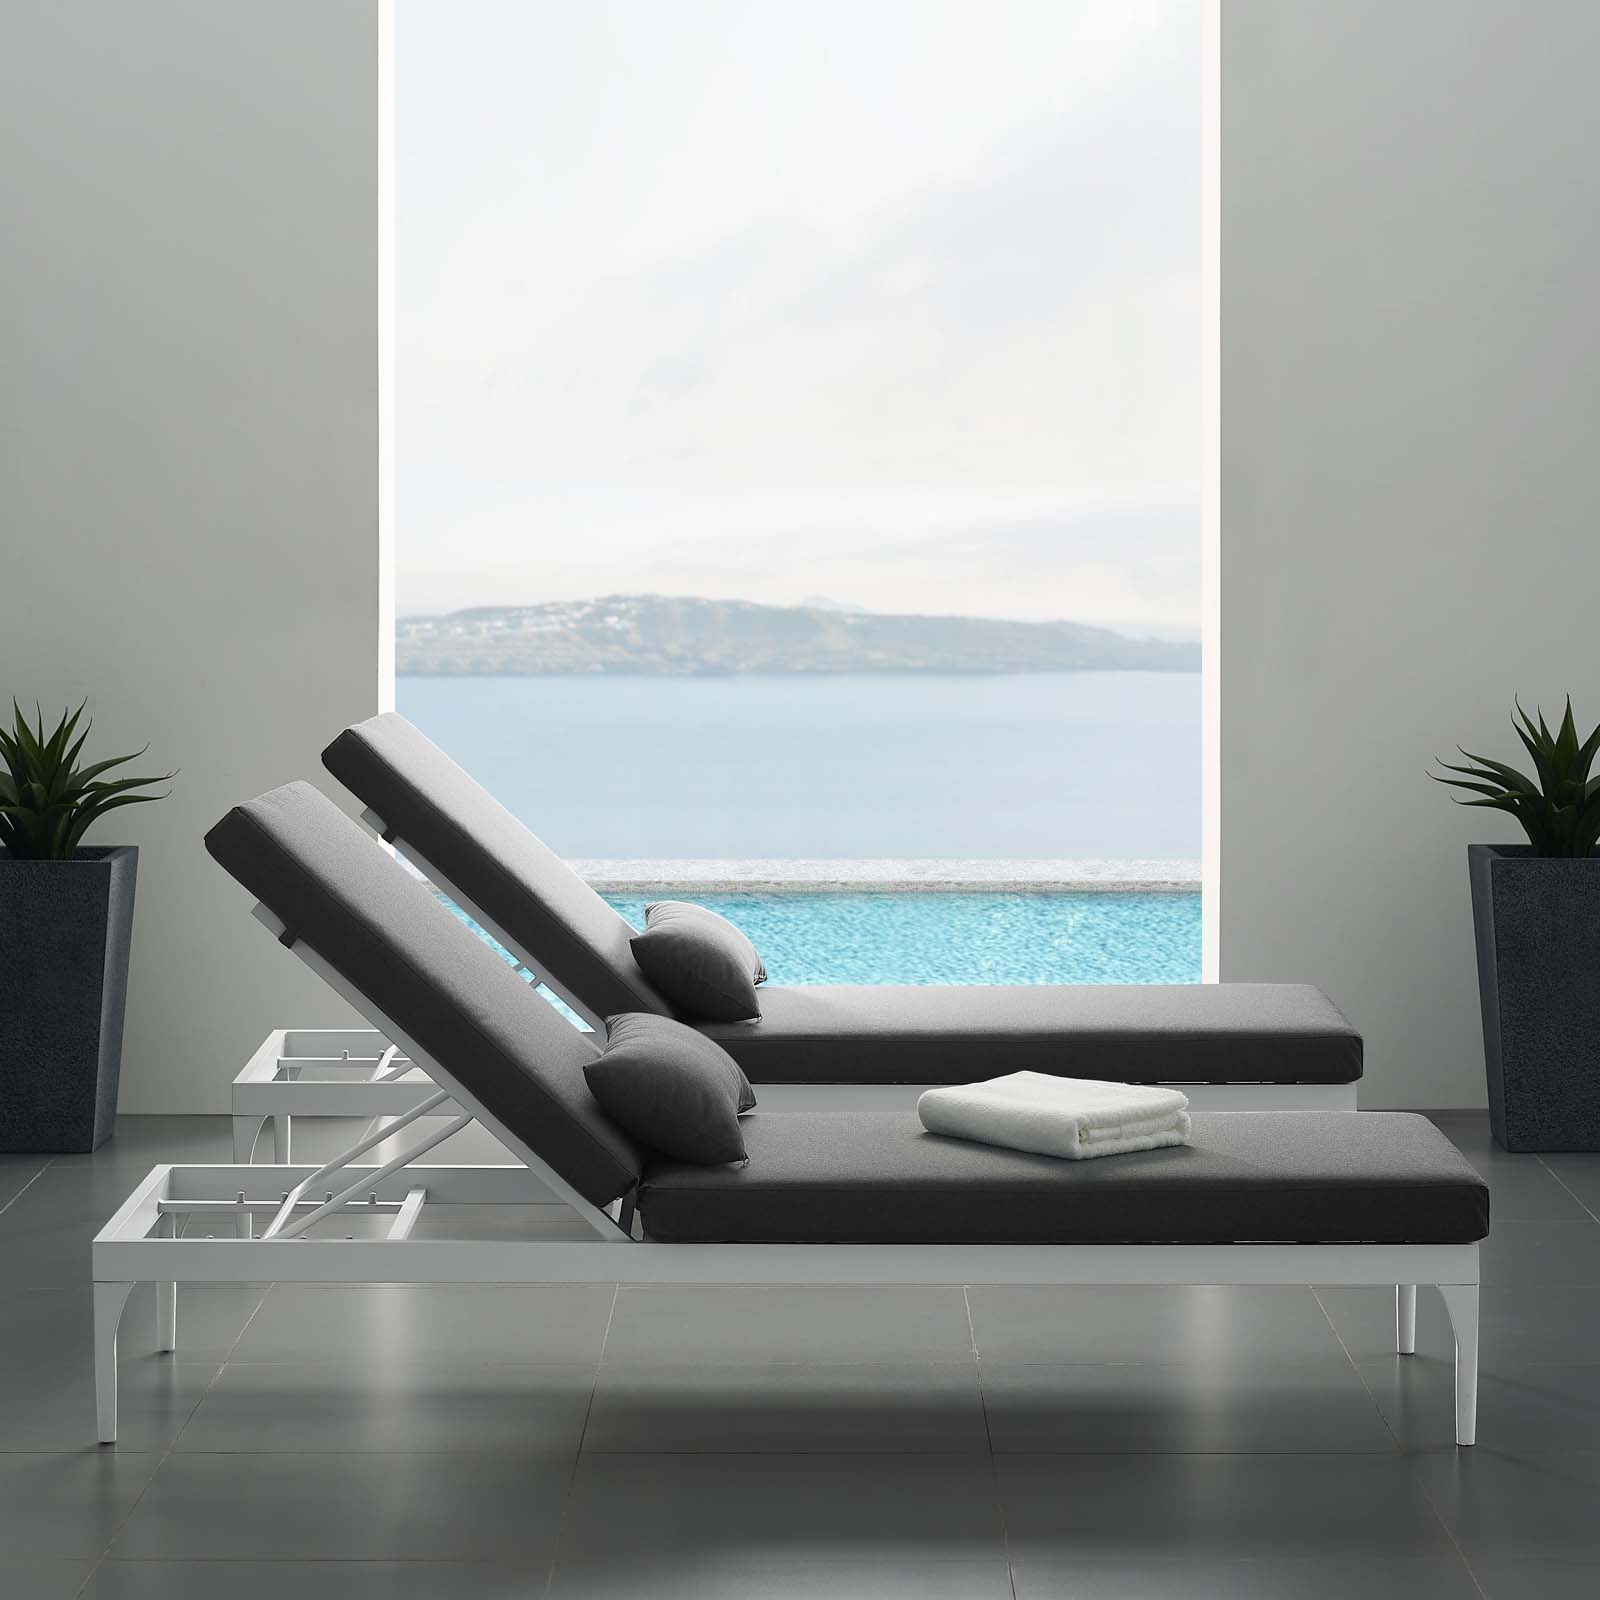 Modern Contemporary Urban Design Outdoor Patio Balcony Garden Furniture Lounge Chair Chaise, Fabric Metal Steel, White Grey Gray - image 4 of 7